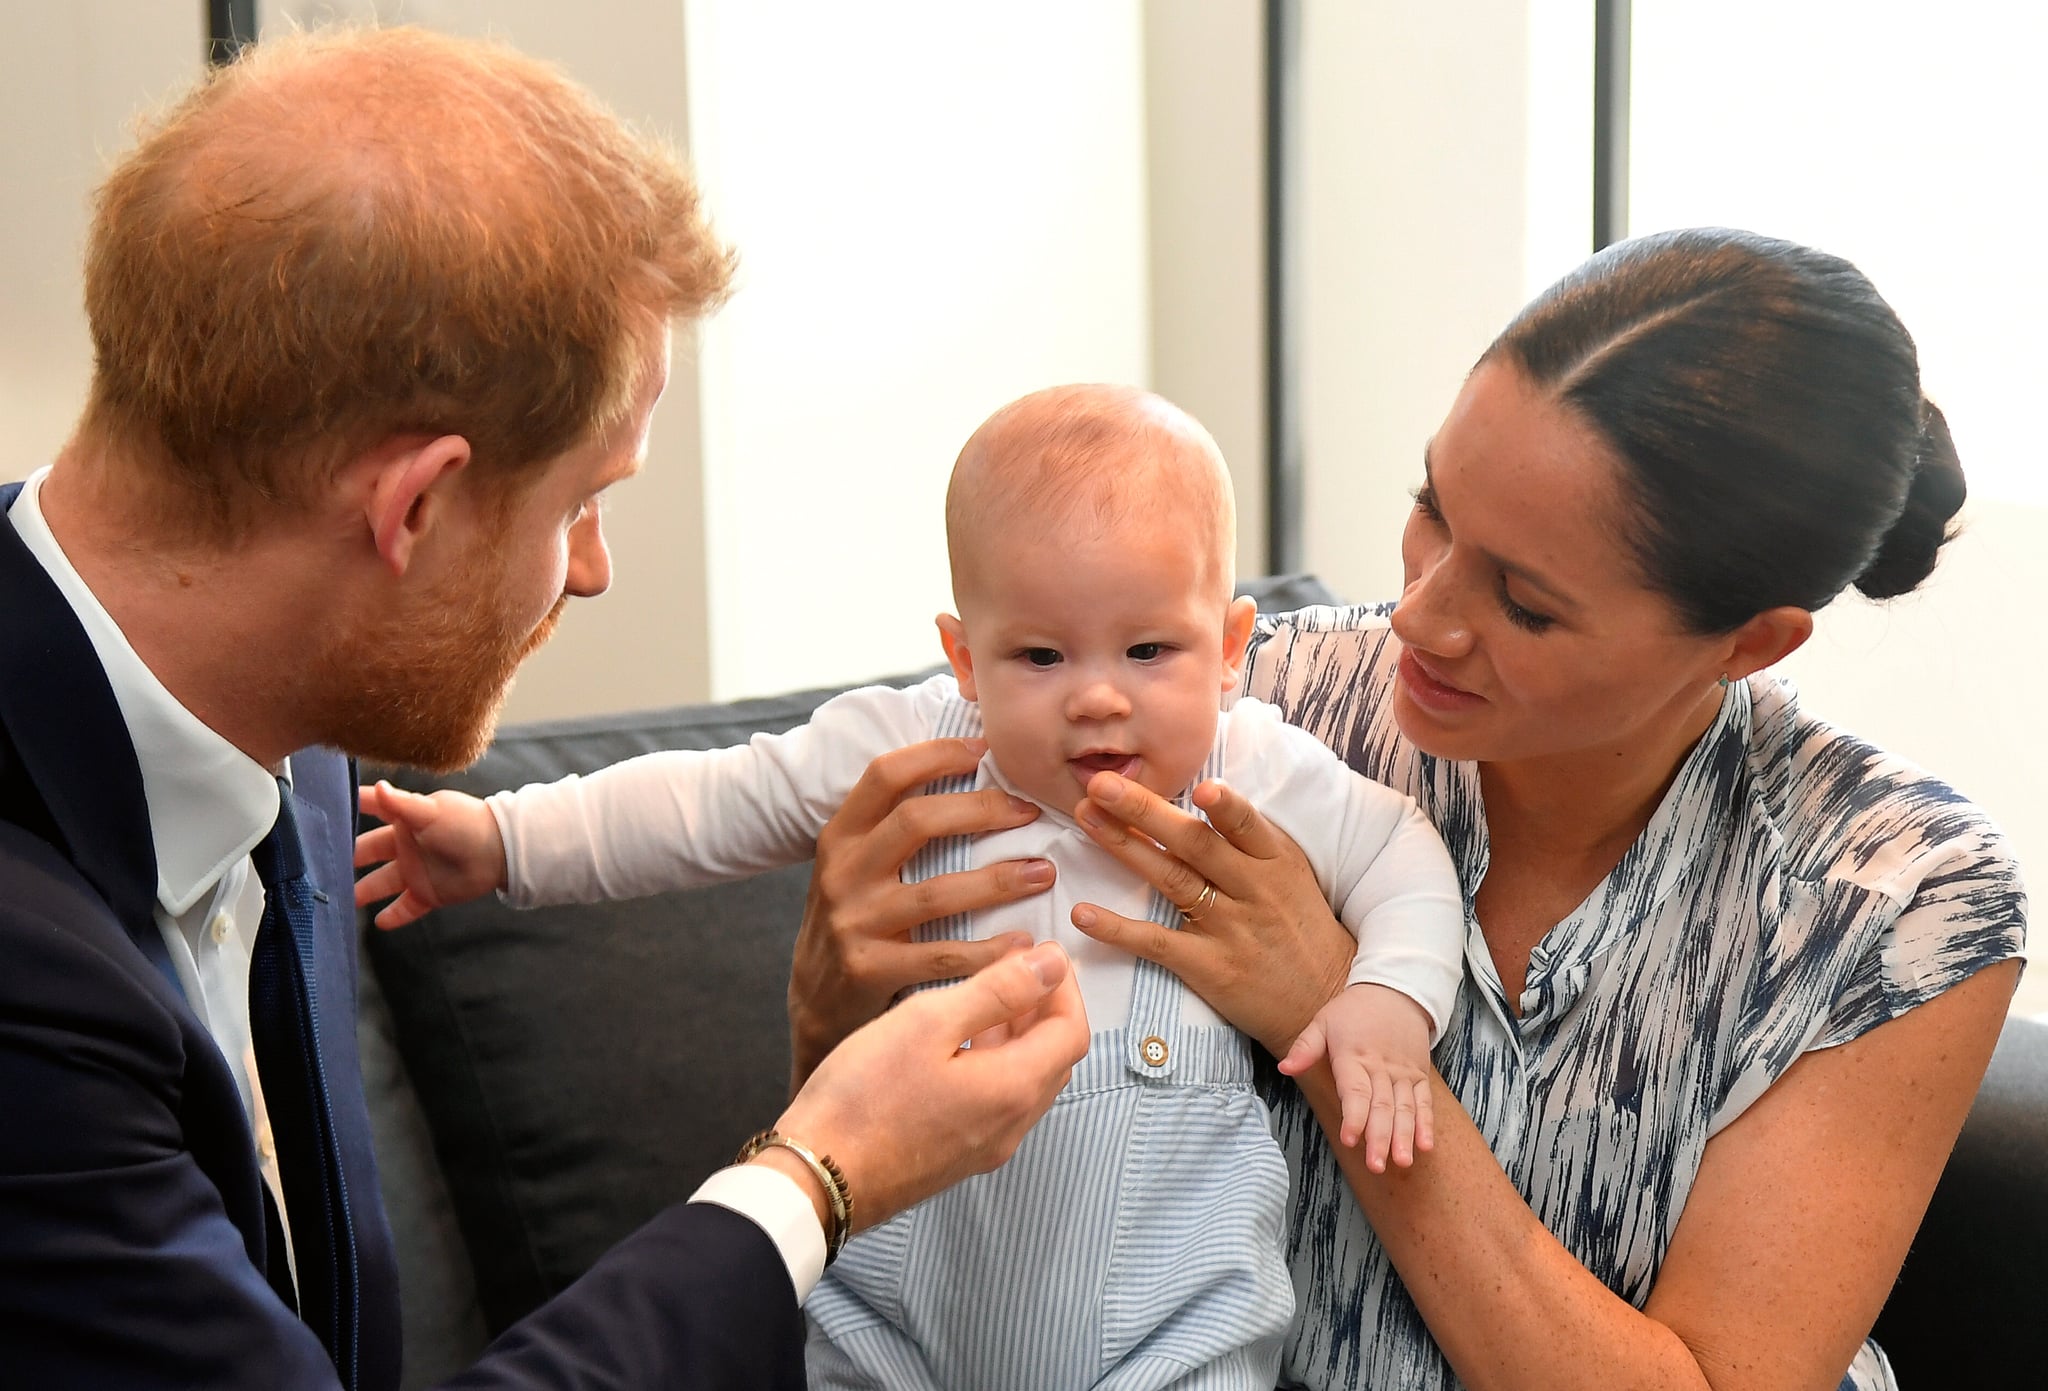 CAPE TOWN, SOUTH AFRICA - SEPTEMBER 25: Prince Harry, Duke of Sussex and Meghan, Duchess of Sussex tend to their baby son Archie Mountbatten-Windsor at a meeting with Archbishop Desmond Tutu at the Desmond & Leah Tutu Legacy Foundation during their royal tour of South Africa on September 25, 2019 in Cape Town, South Africa. (Photo by Toby Melville - Pool/Getty Images)